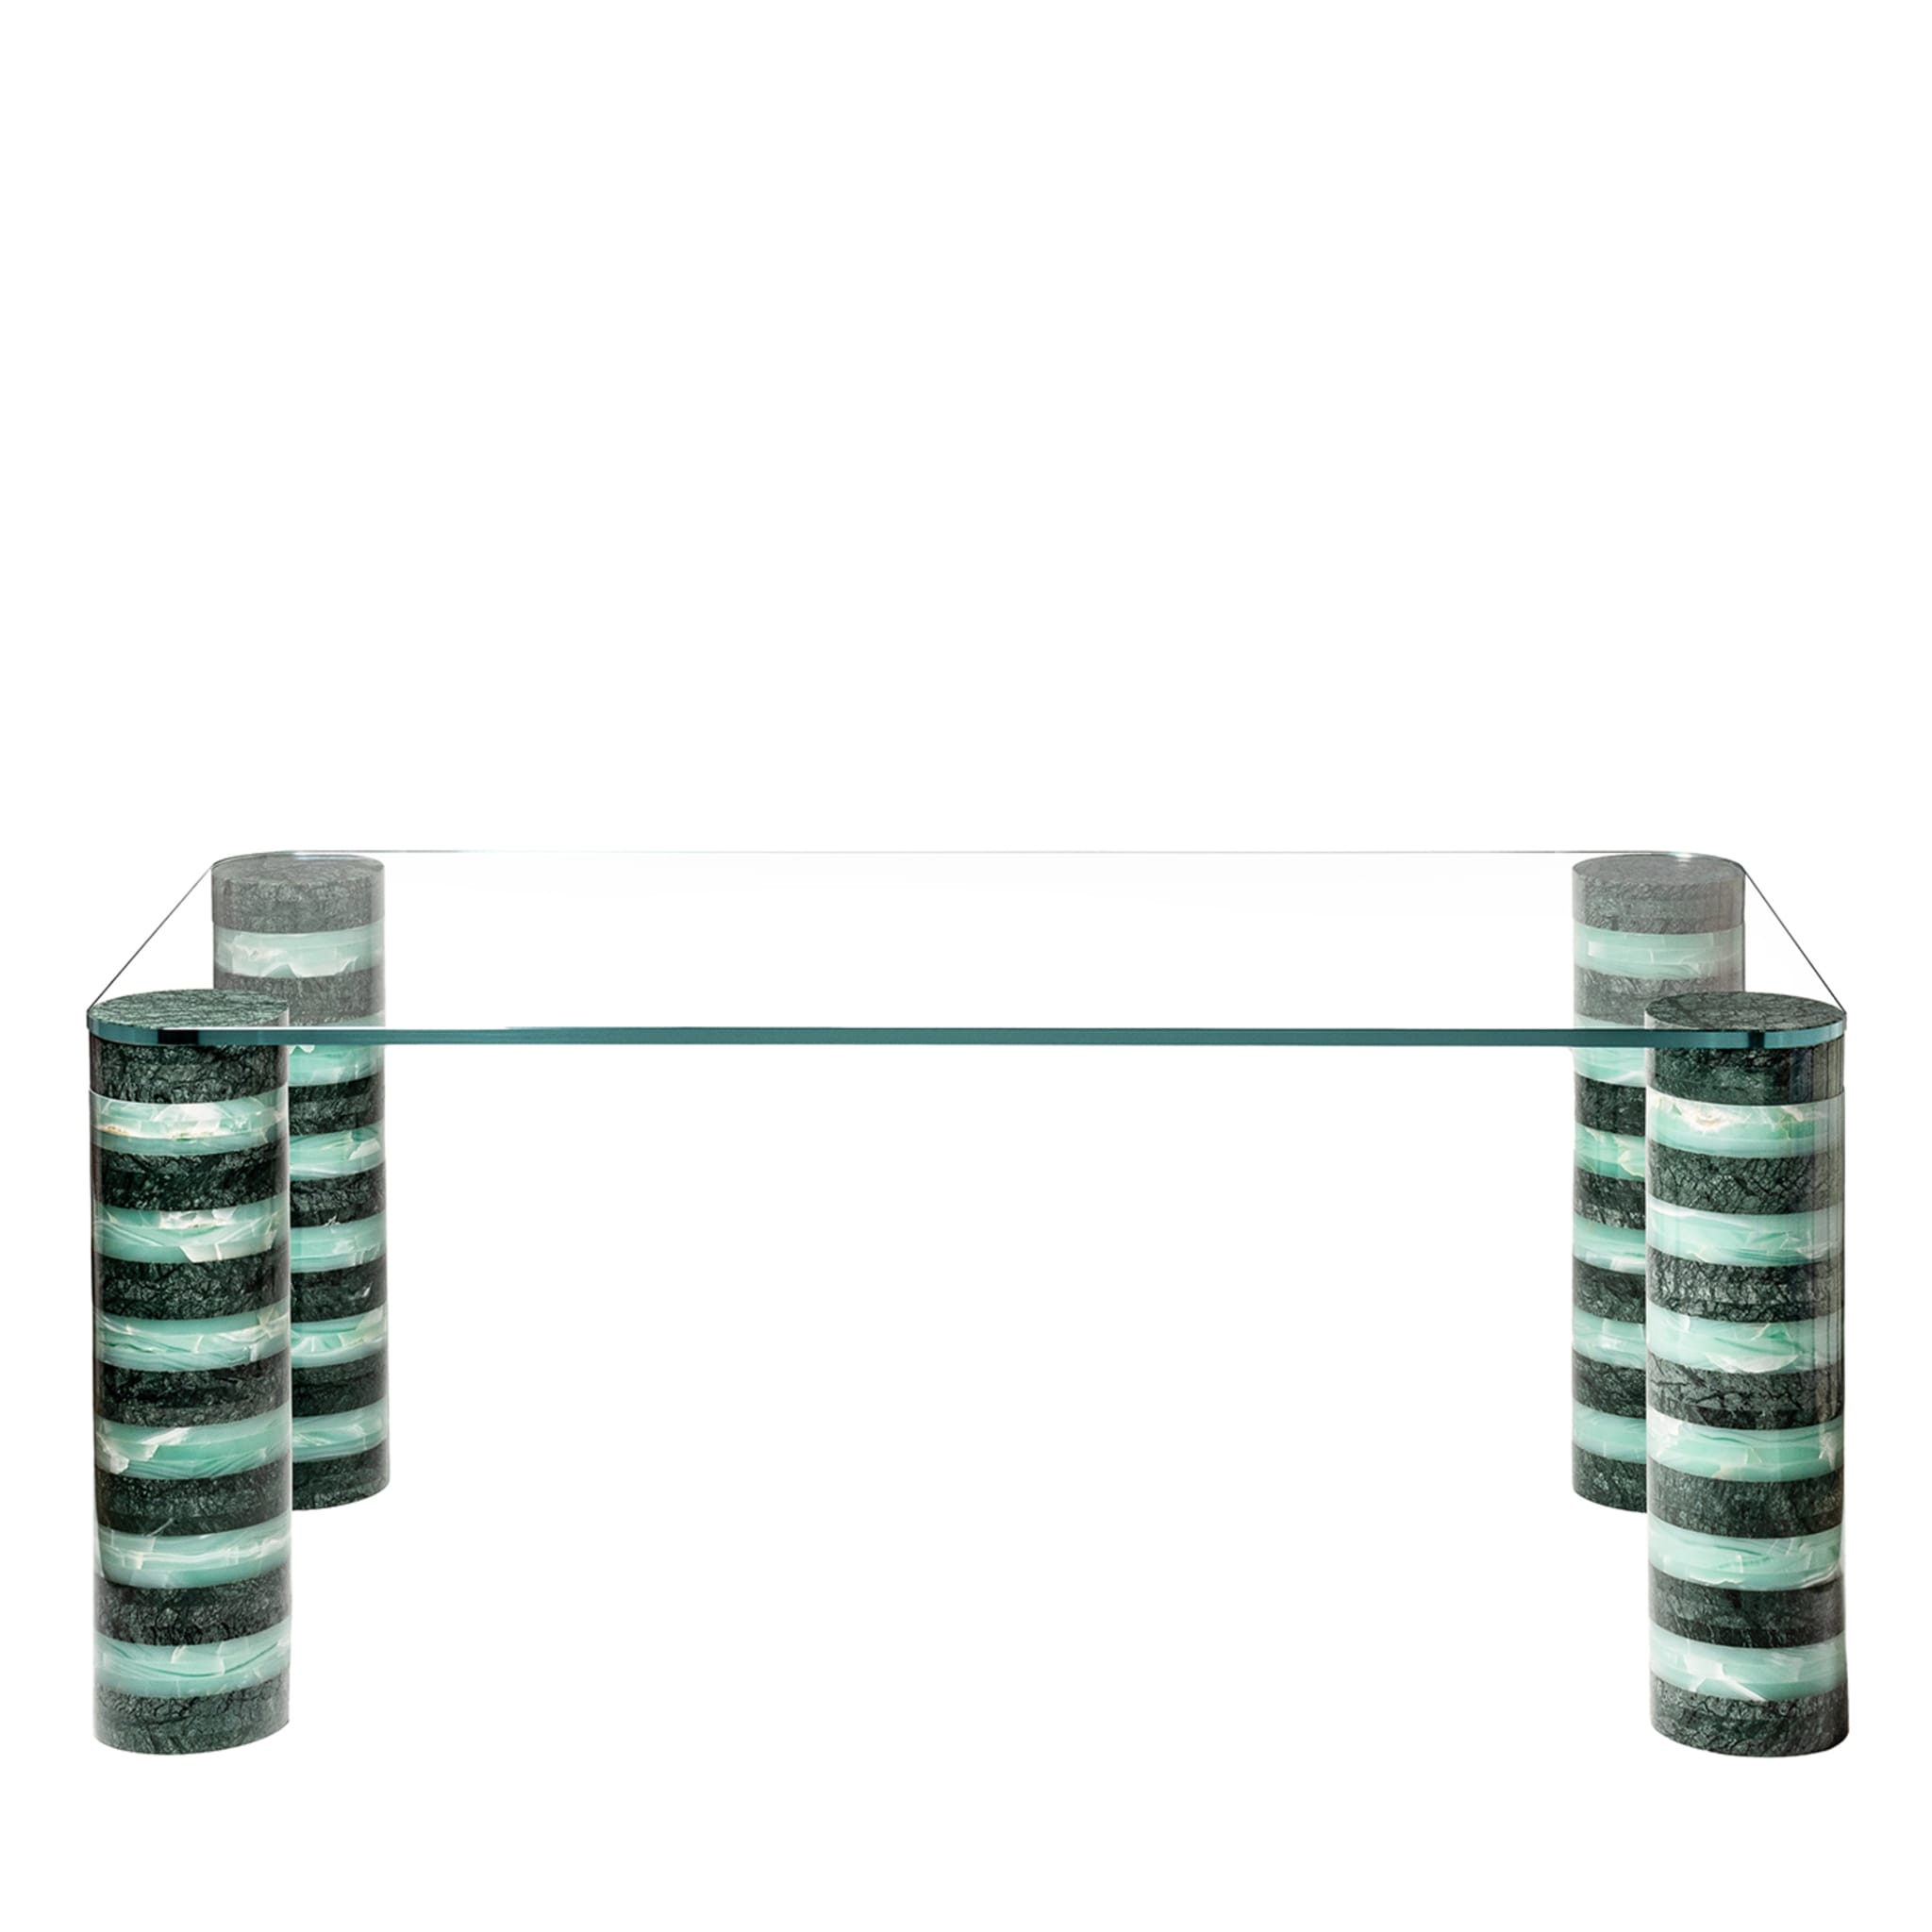 Architexture Living Table 01 by Patricia Urquiola - Main view